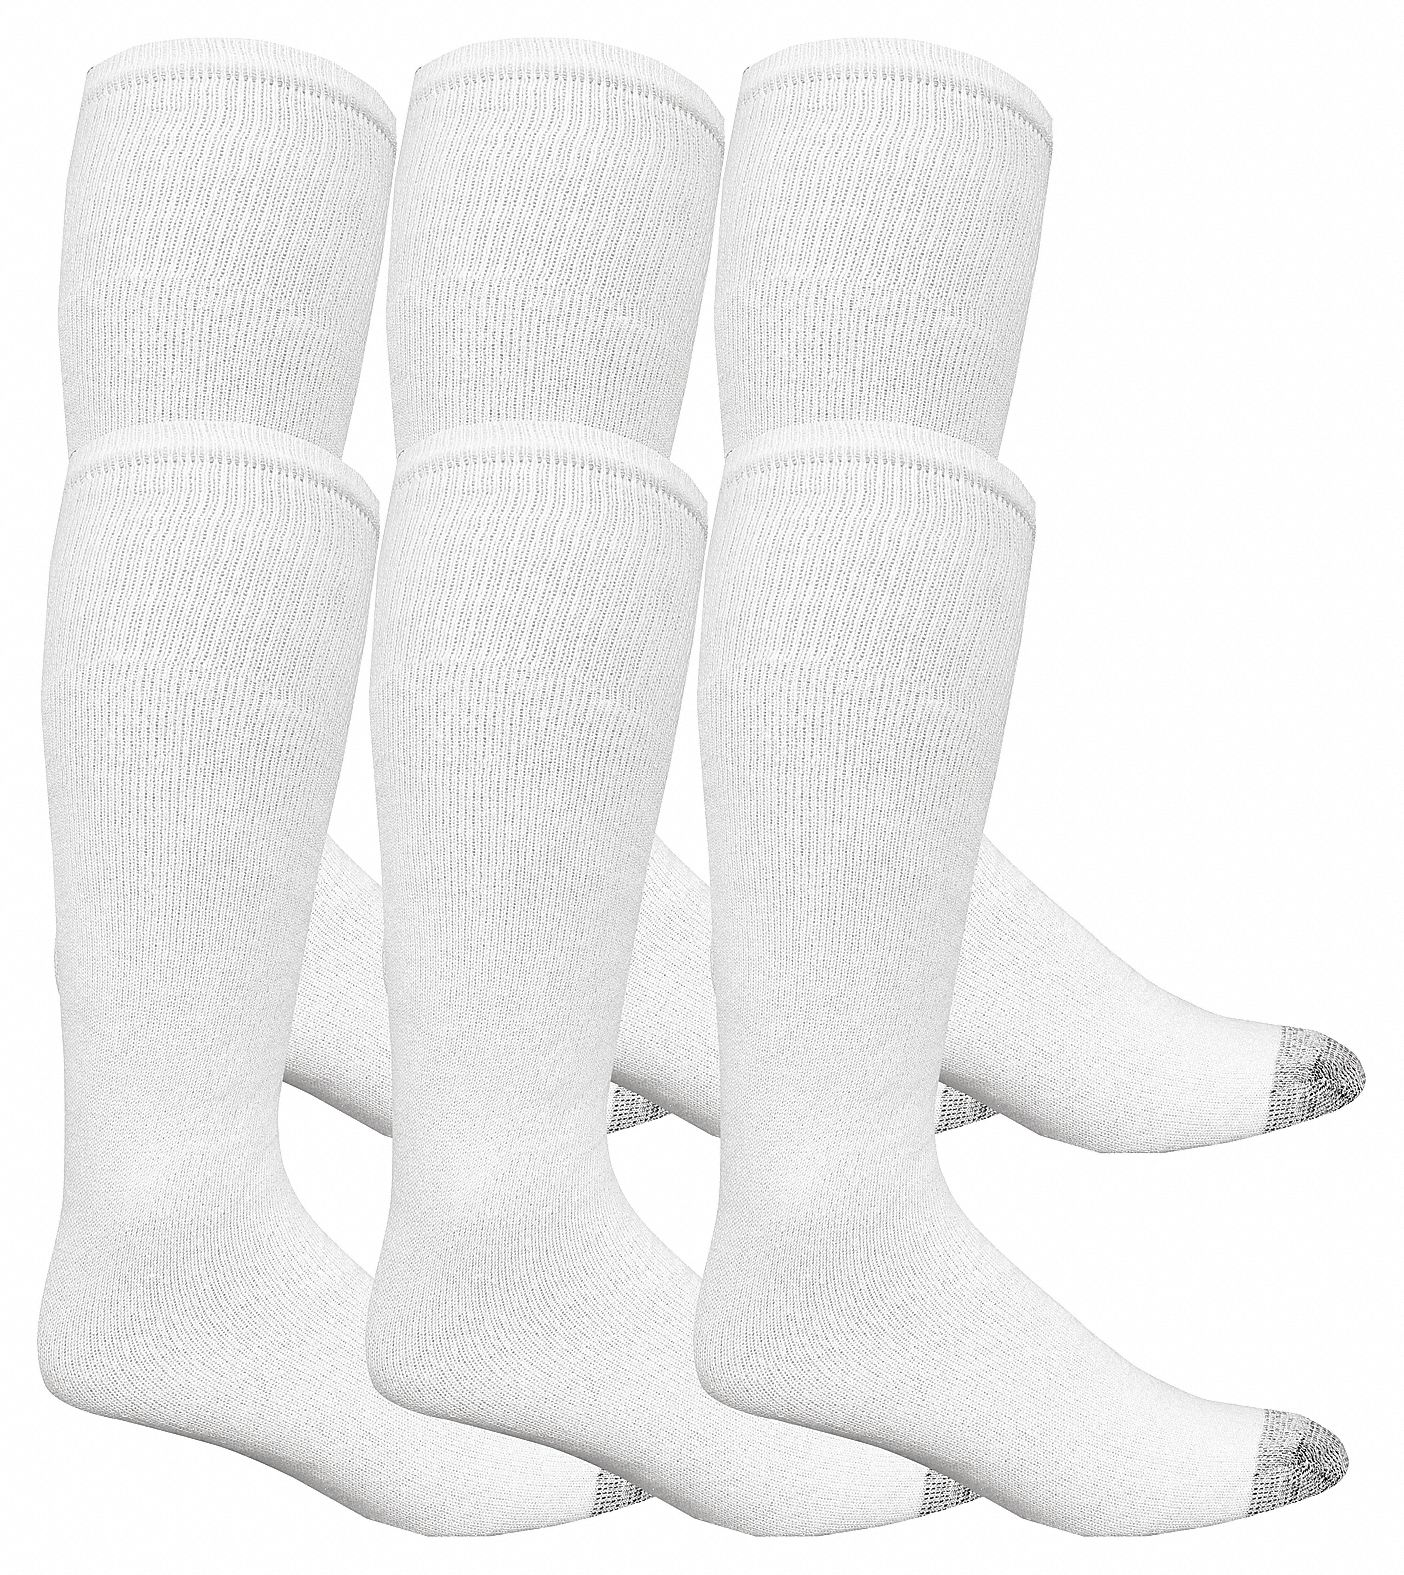 Socks: Crew, Men's, 6 to 12 Fits Shoe Size, White, Cotton, FRUIT OF THE LOOM, 10 to 13, 6 PK